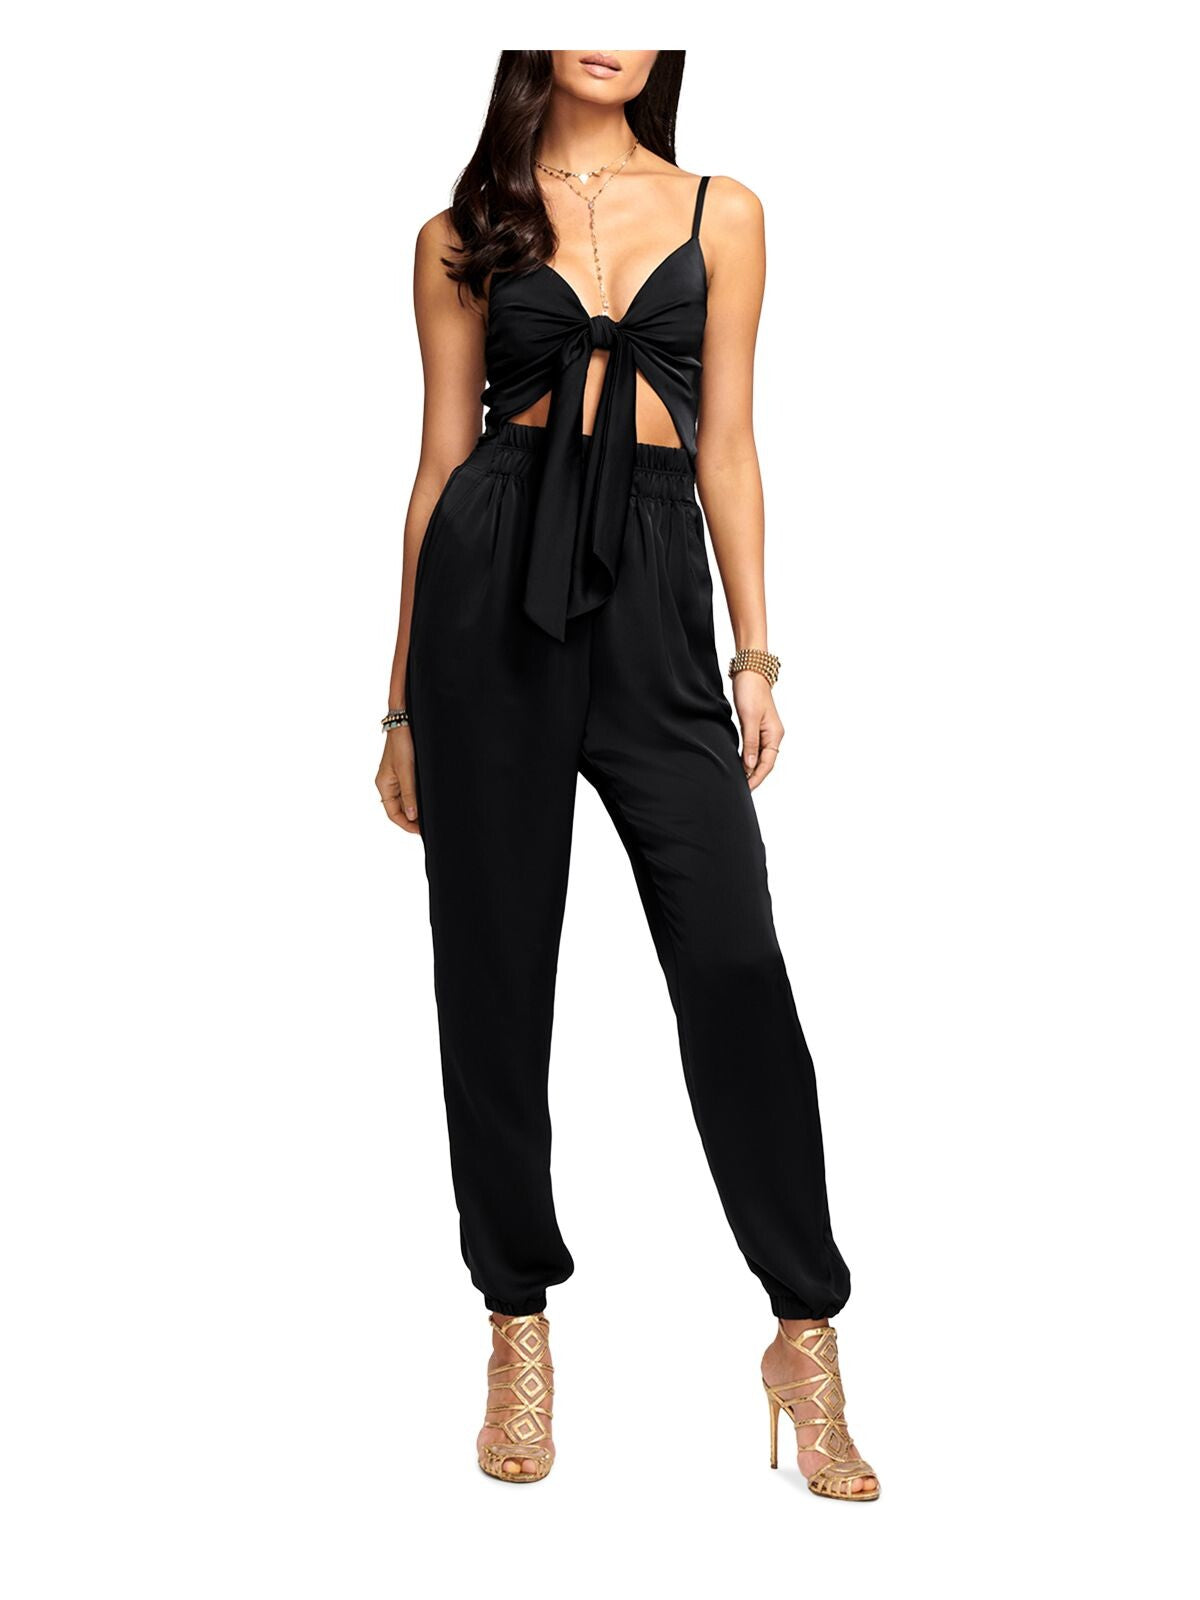 RAMY BROOK Womens Black Adjustable Smocked Tie Elastic Cuffs Cut Out Spaghetti Strap V Neck Cocktail Straight leg Jumpsuit M